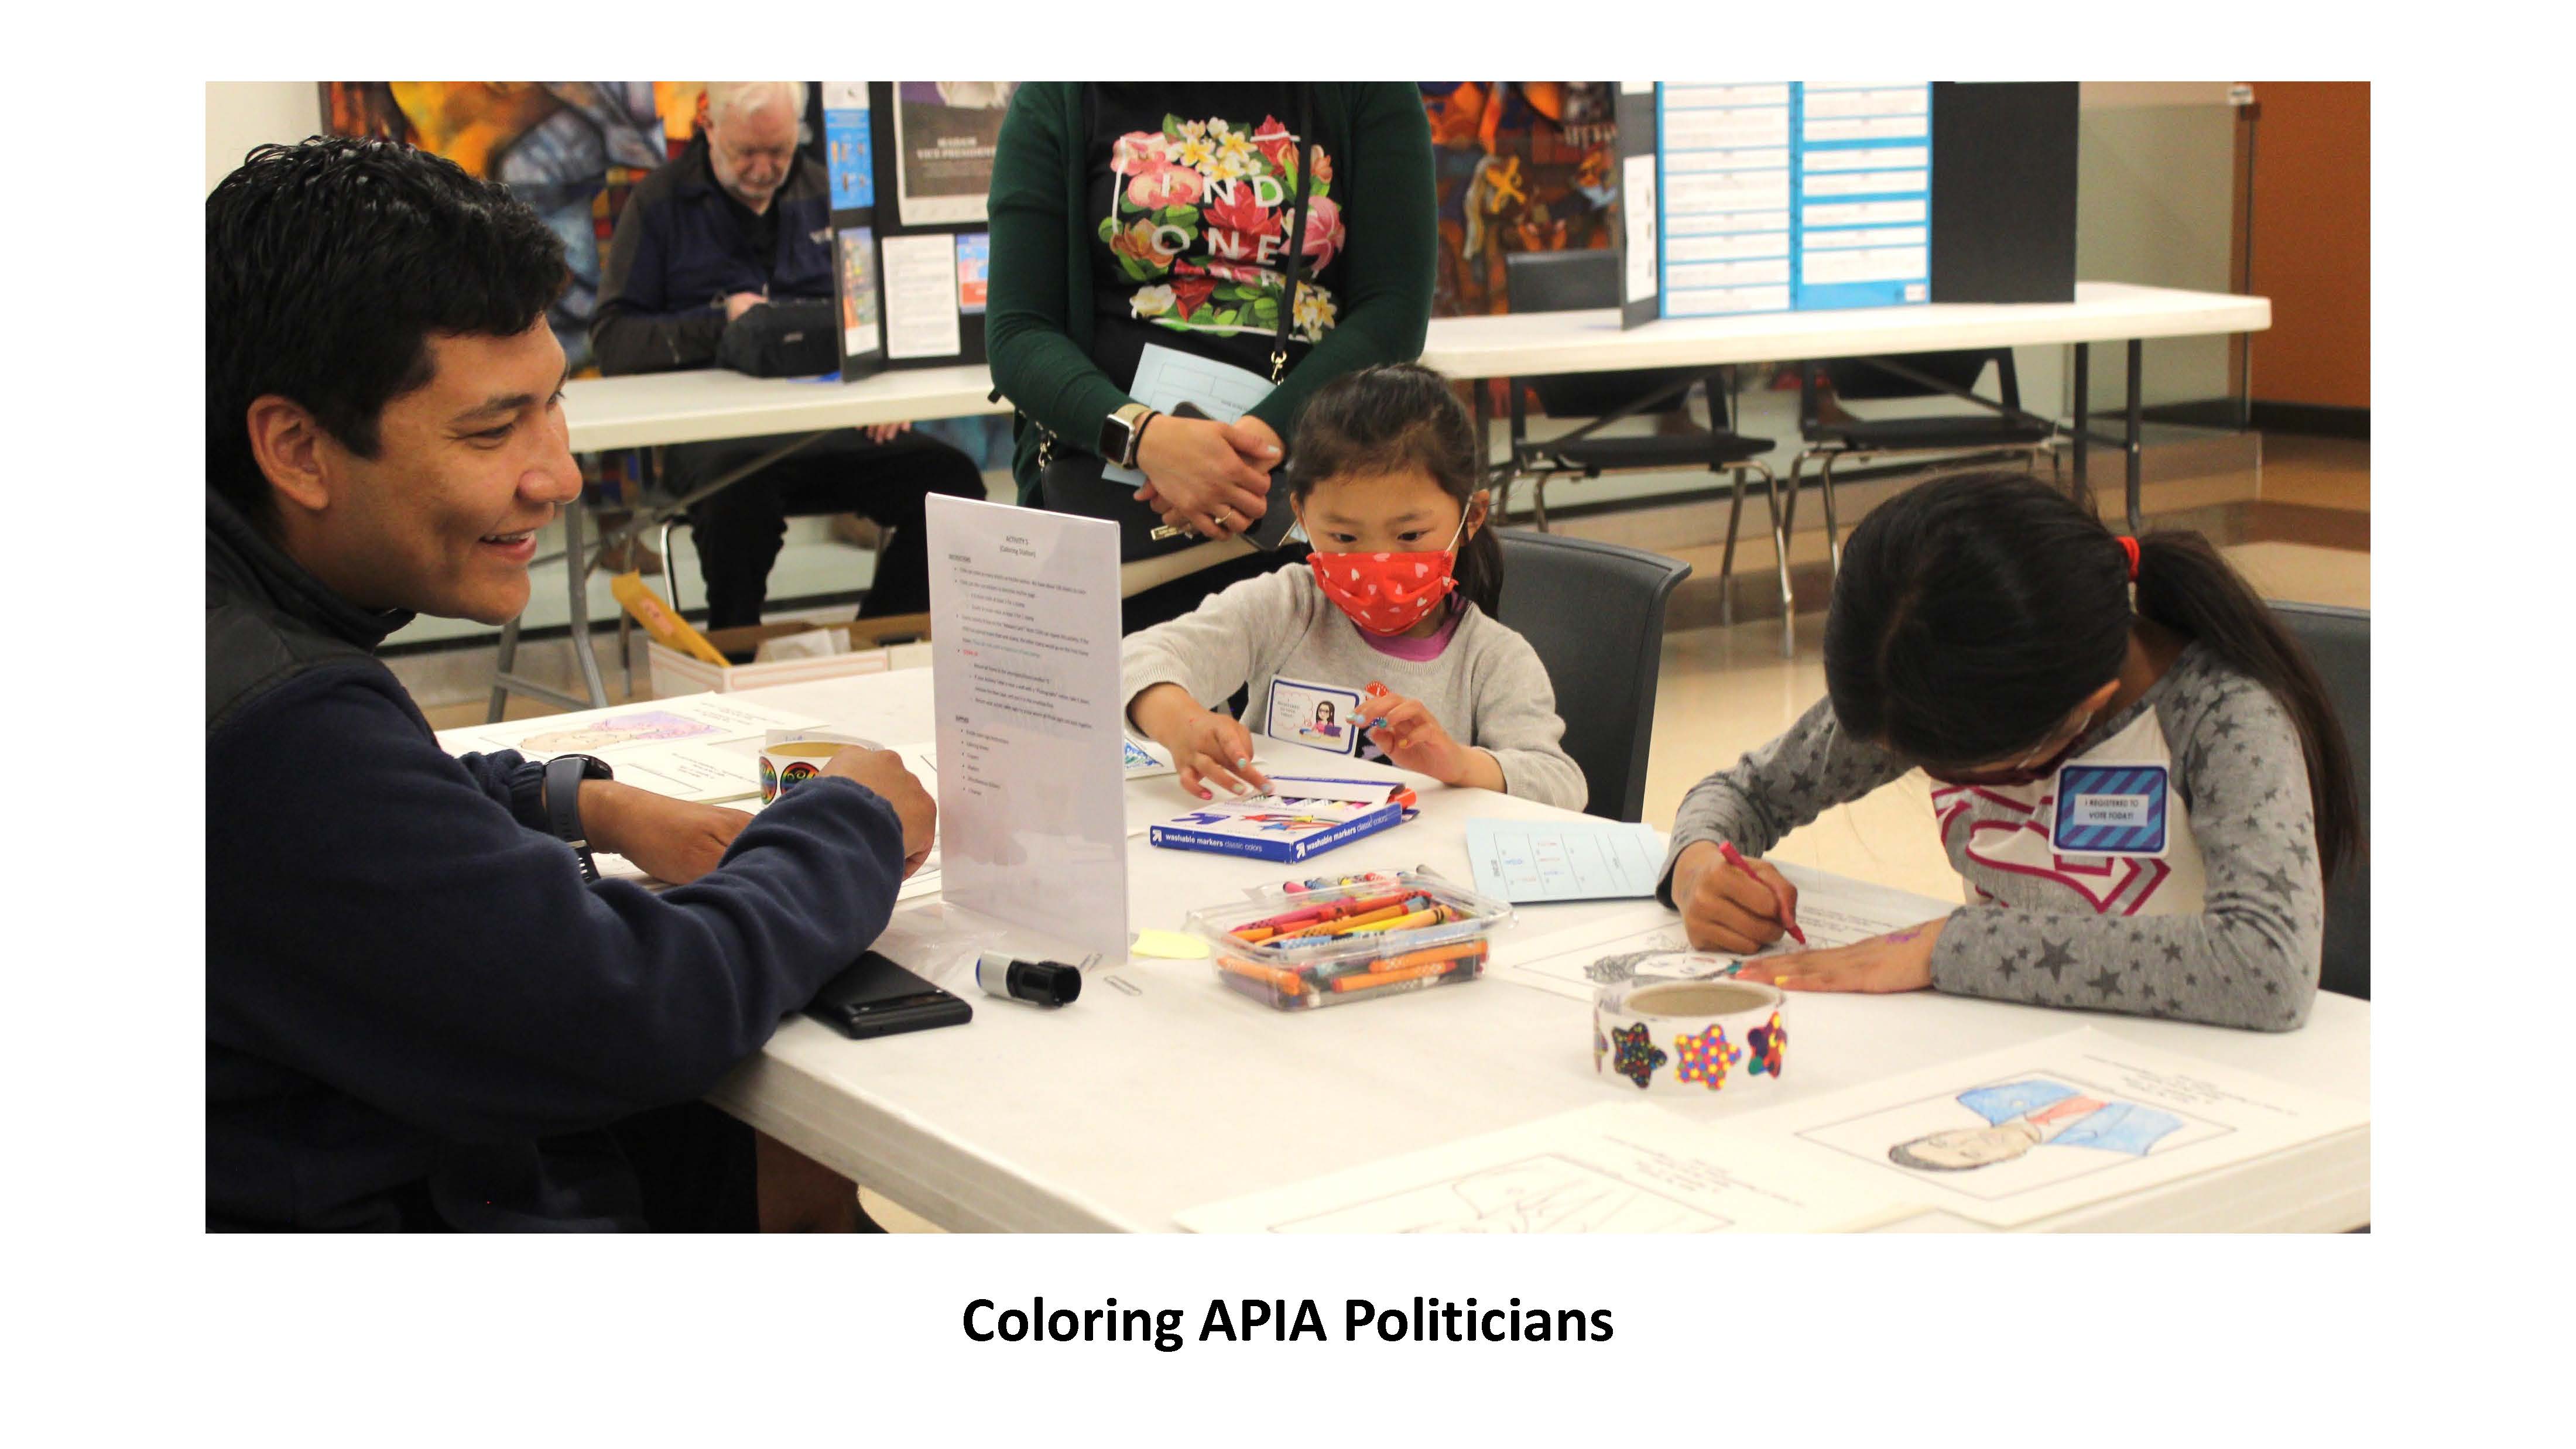 Coloring station